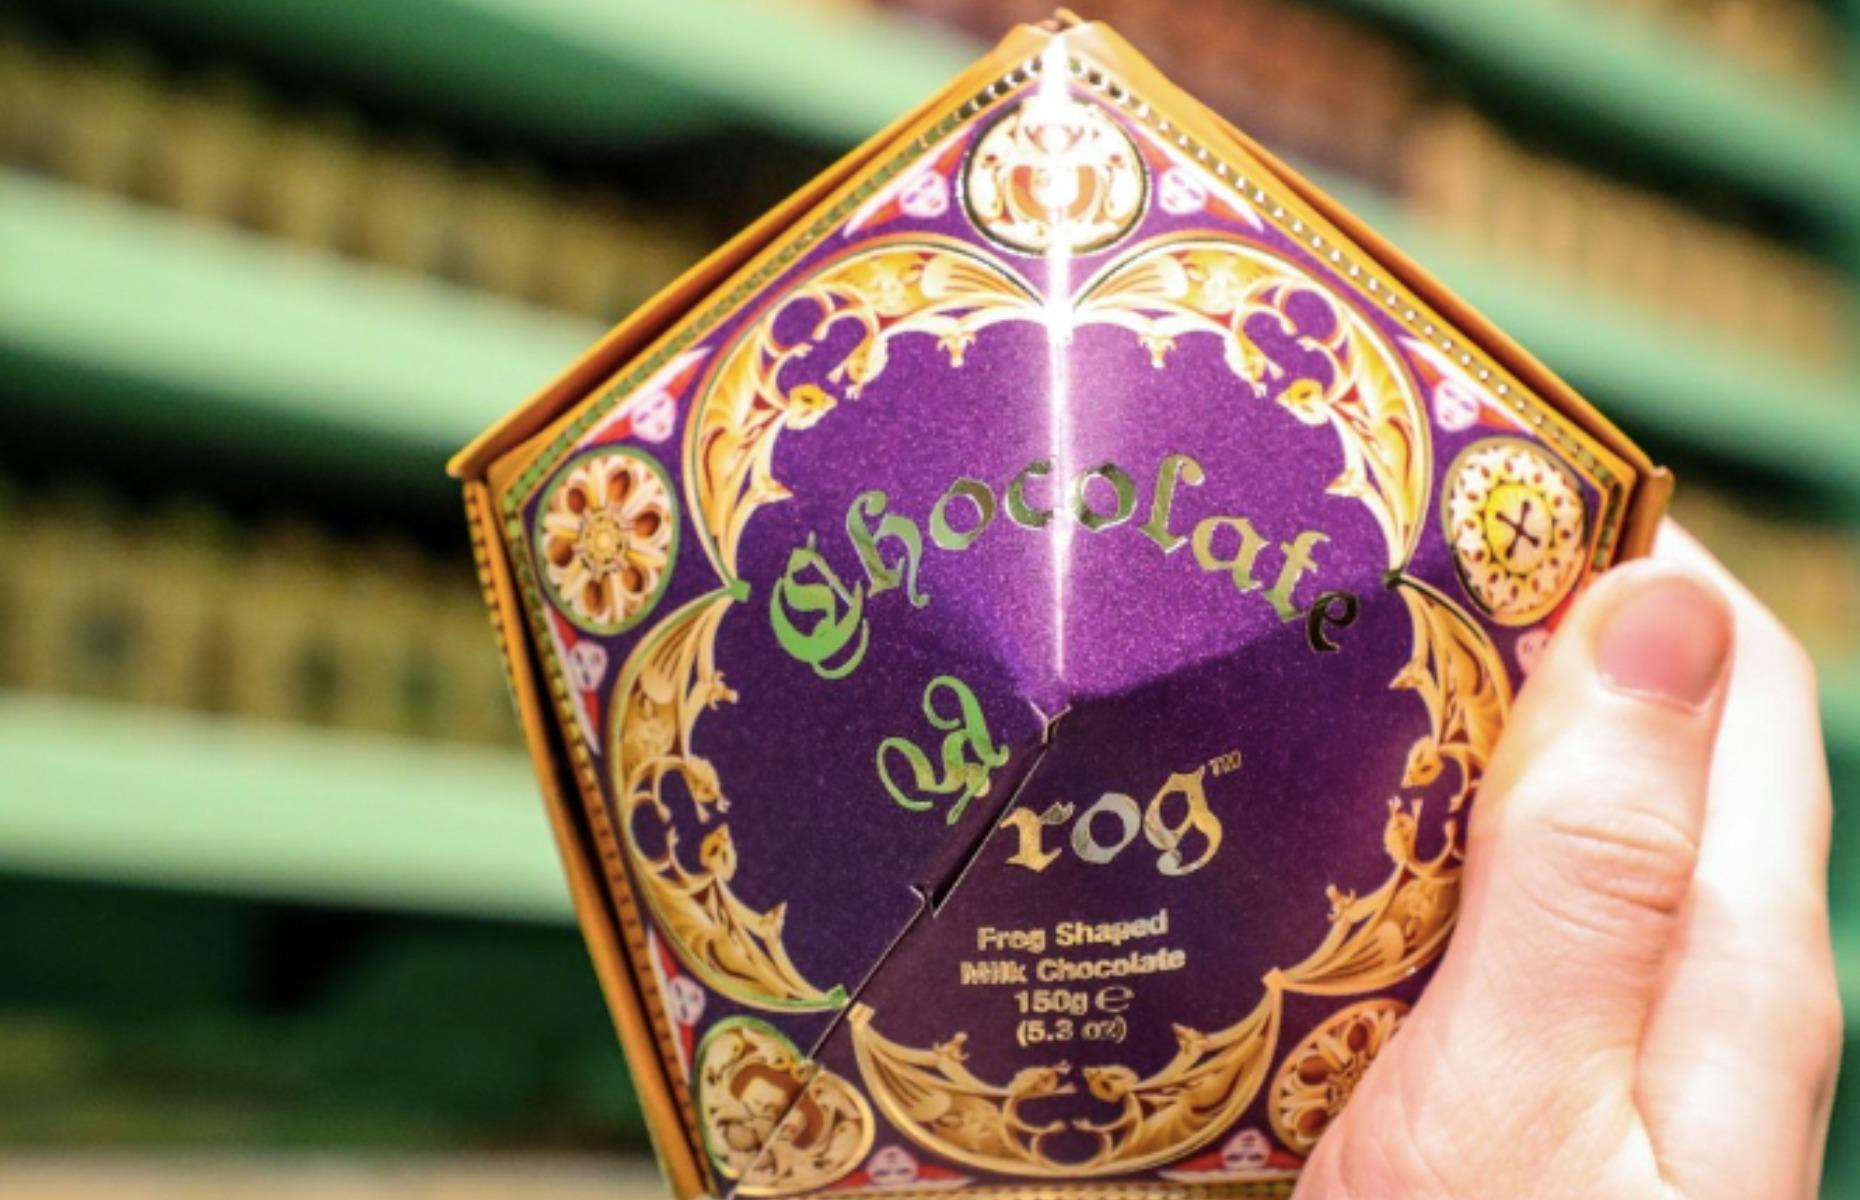 <p>The chocolate frog is arguably one of the most famous snacks from the Hogwarts Express lunch trolley. This riff on the idea is made from milk chocolate and, just like in the movie, comes packaged in a classic violet and gold Honeydukes box with a collectable wizard card. Fans will love reading about Godric Griffindor, Albus Dumbledore, Gilderoy Lockhart or Rowena Ravenclaw while they enjoy their sweet treat.</p>